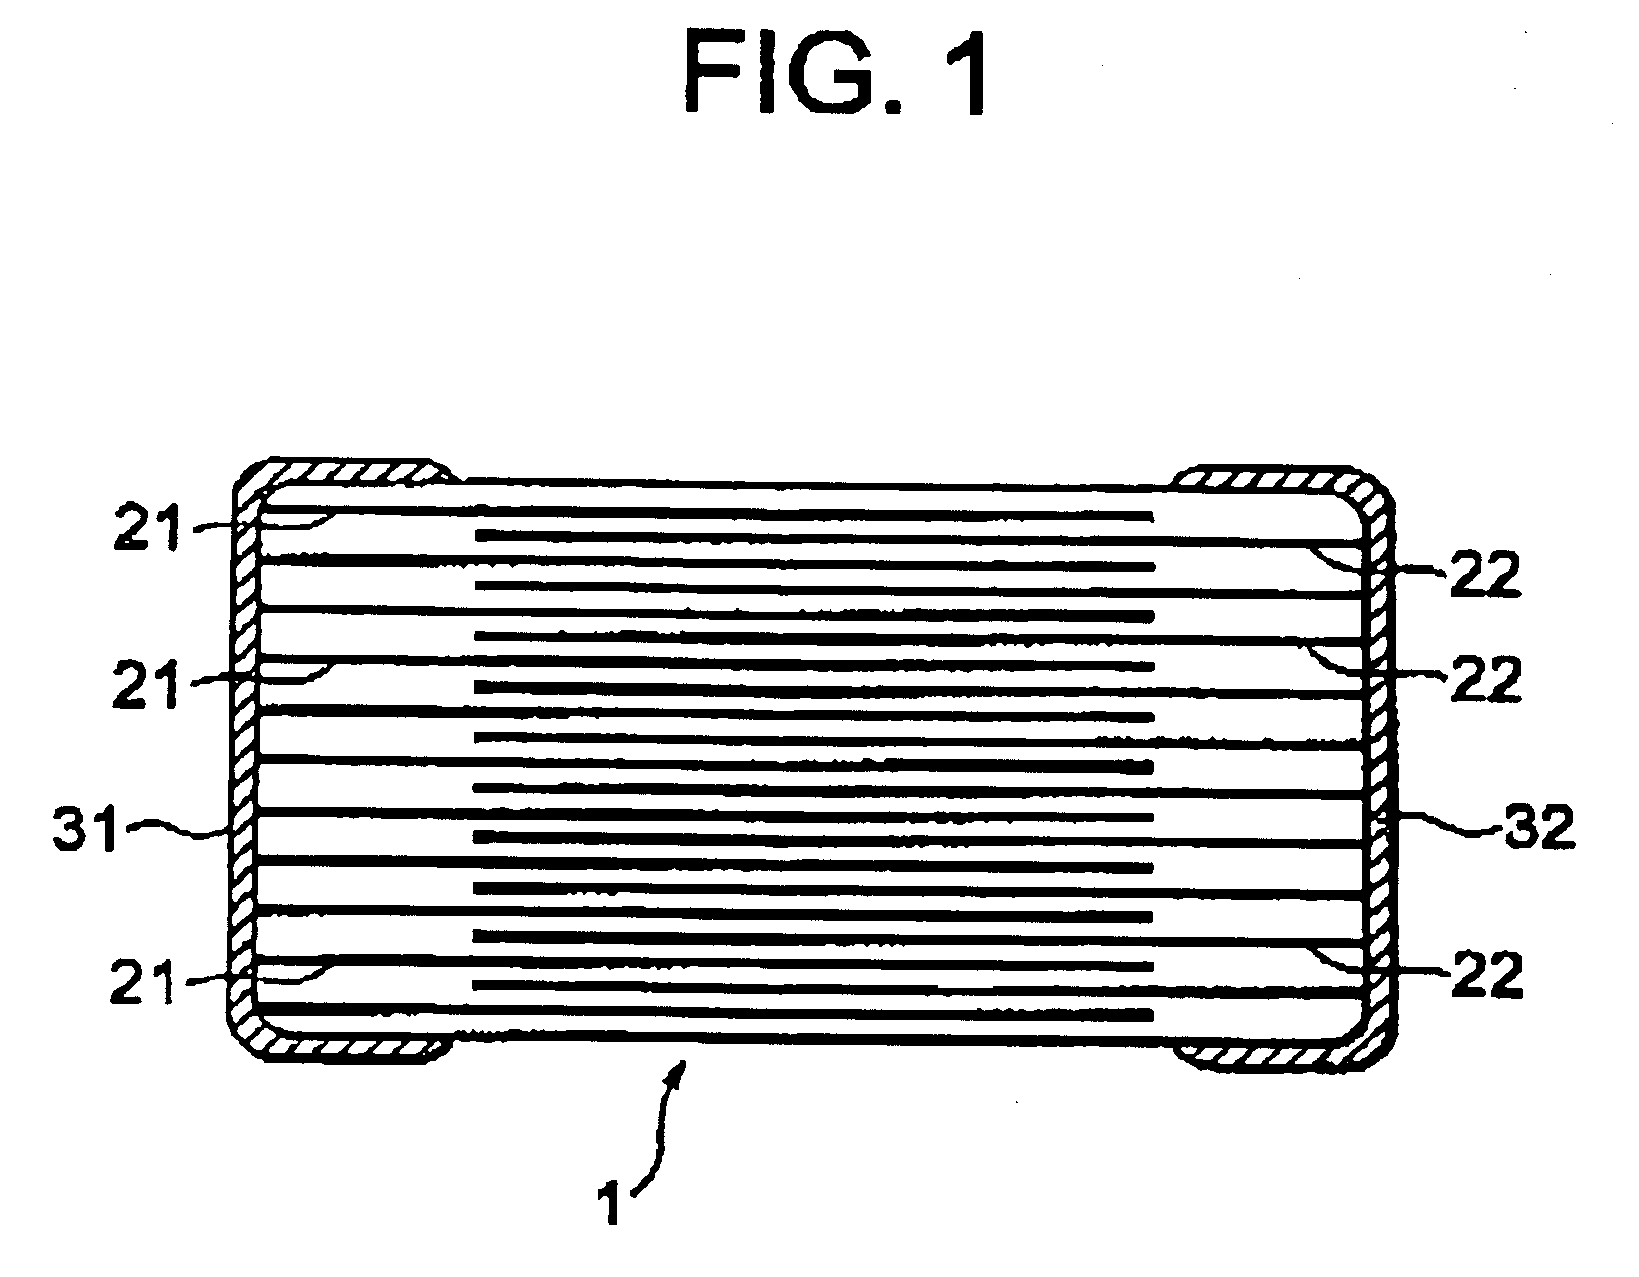 Ceramic electronic device and method of production of same